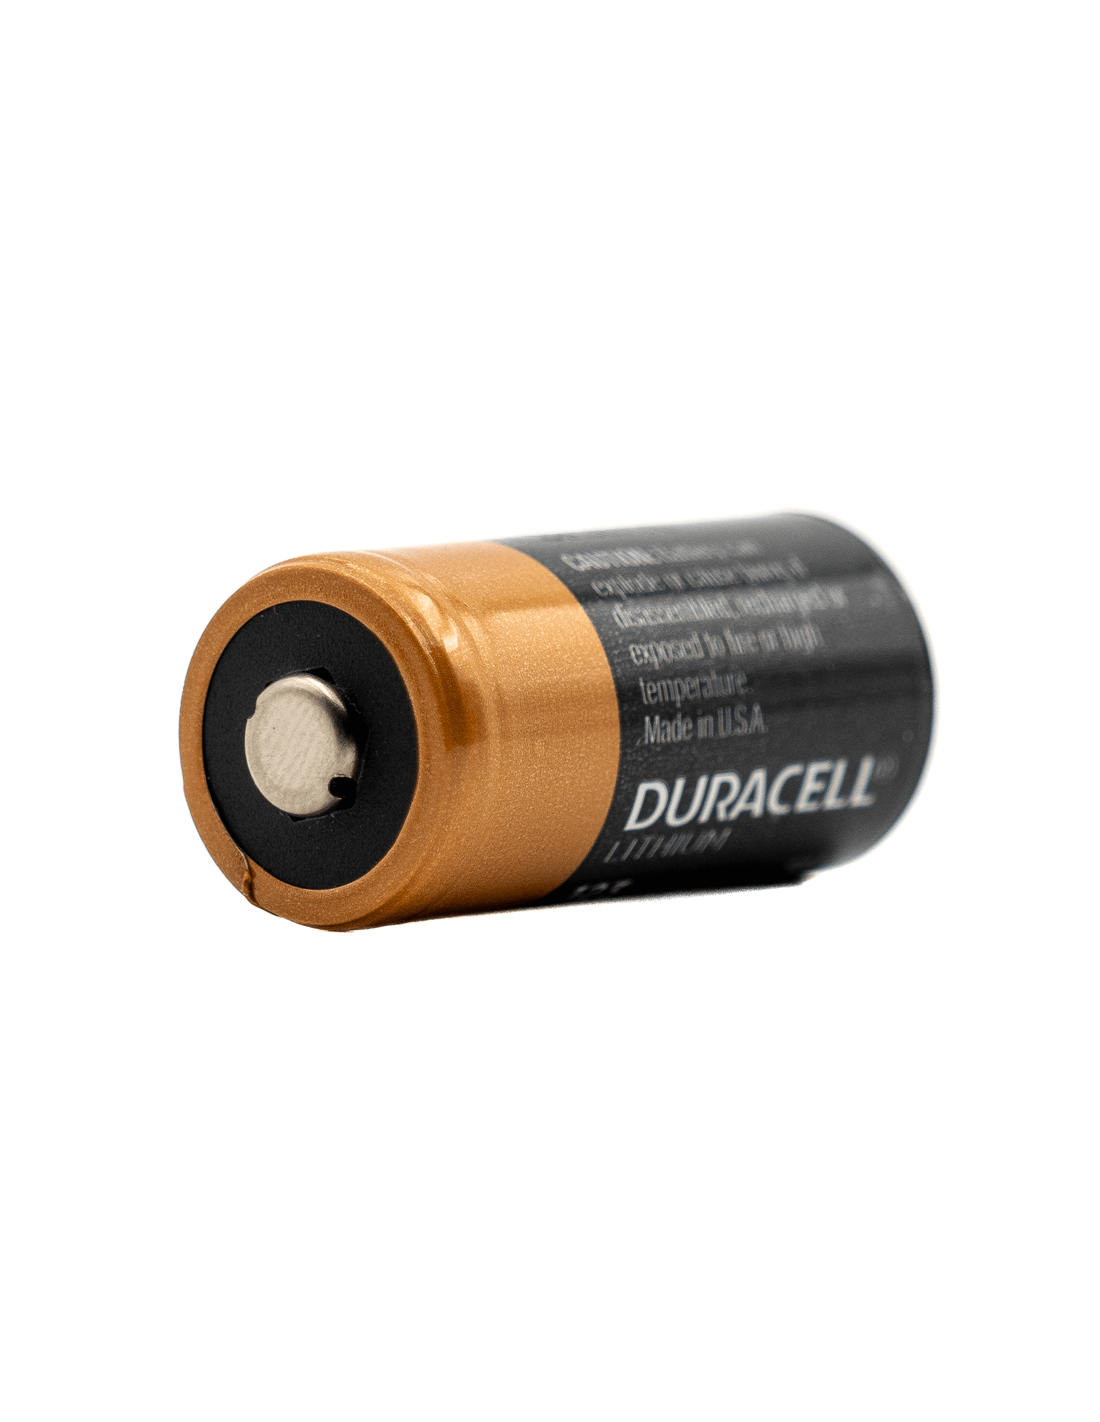 historie serie Foran dig Duracell 3V DL123A 1400Mah Lithium Battery replaces CR123, CR123A - Non  Rechargeable